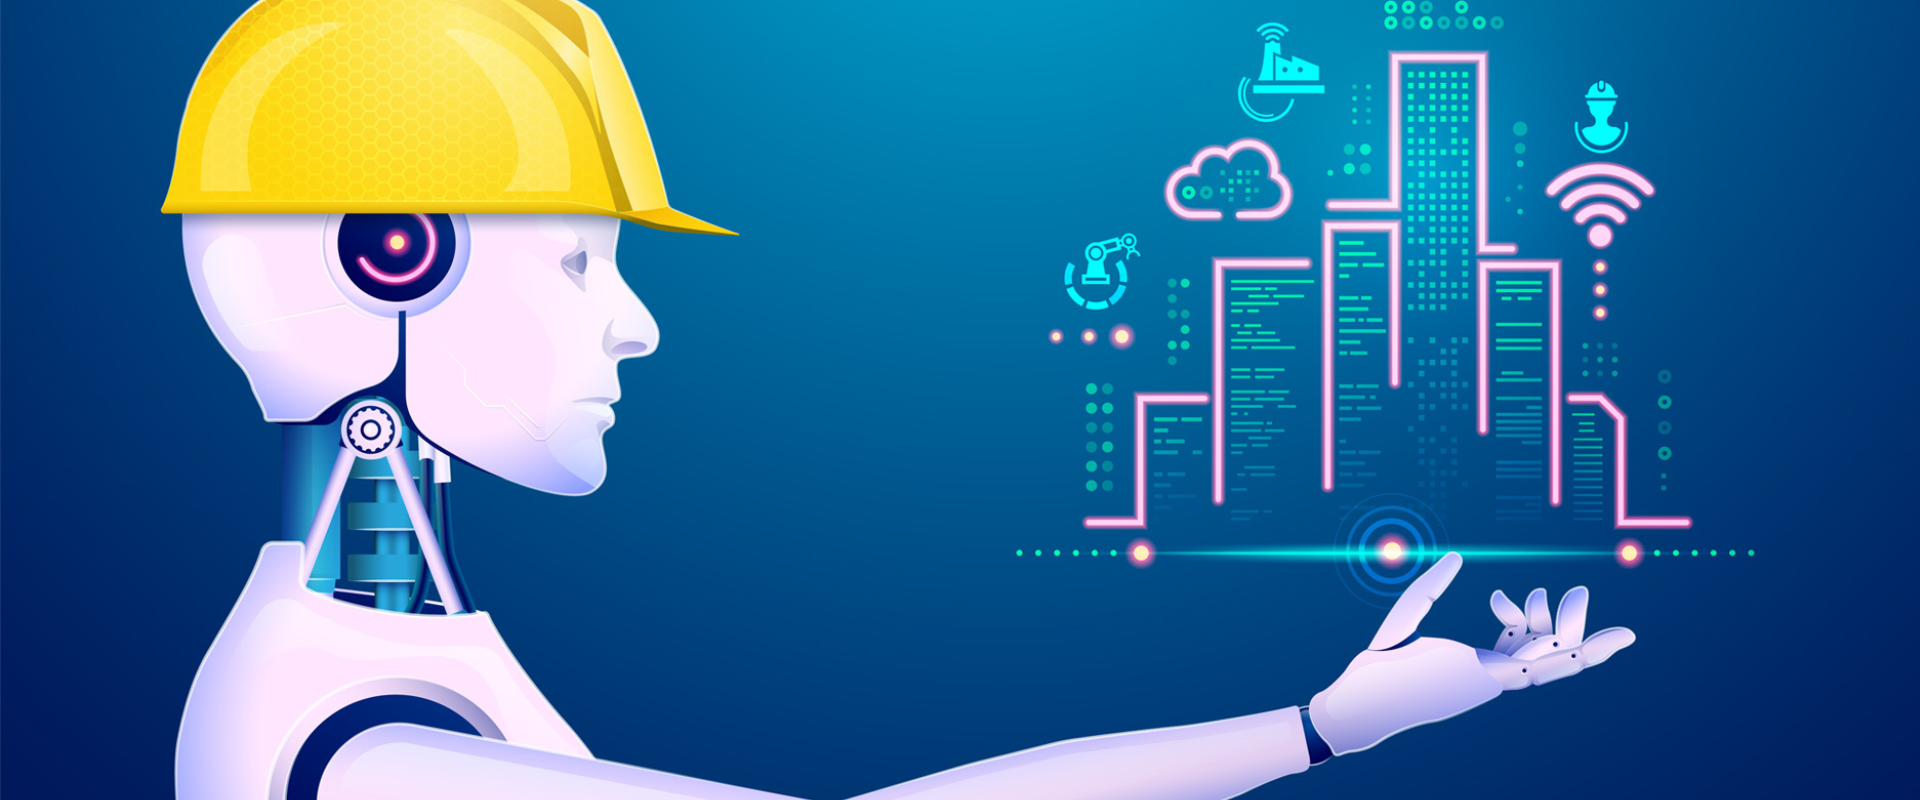 Constructing Intelligence: The Role of AI in Construction